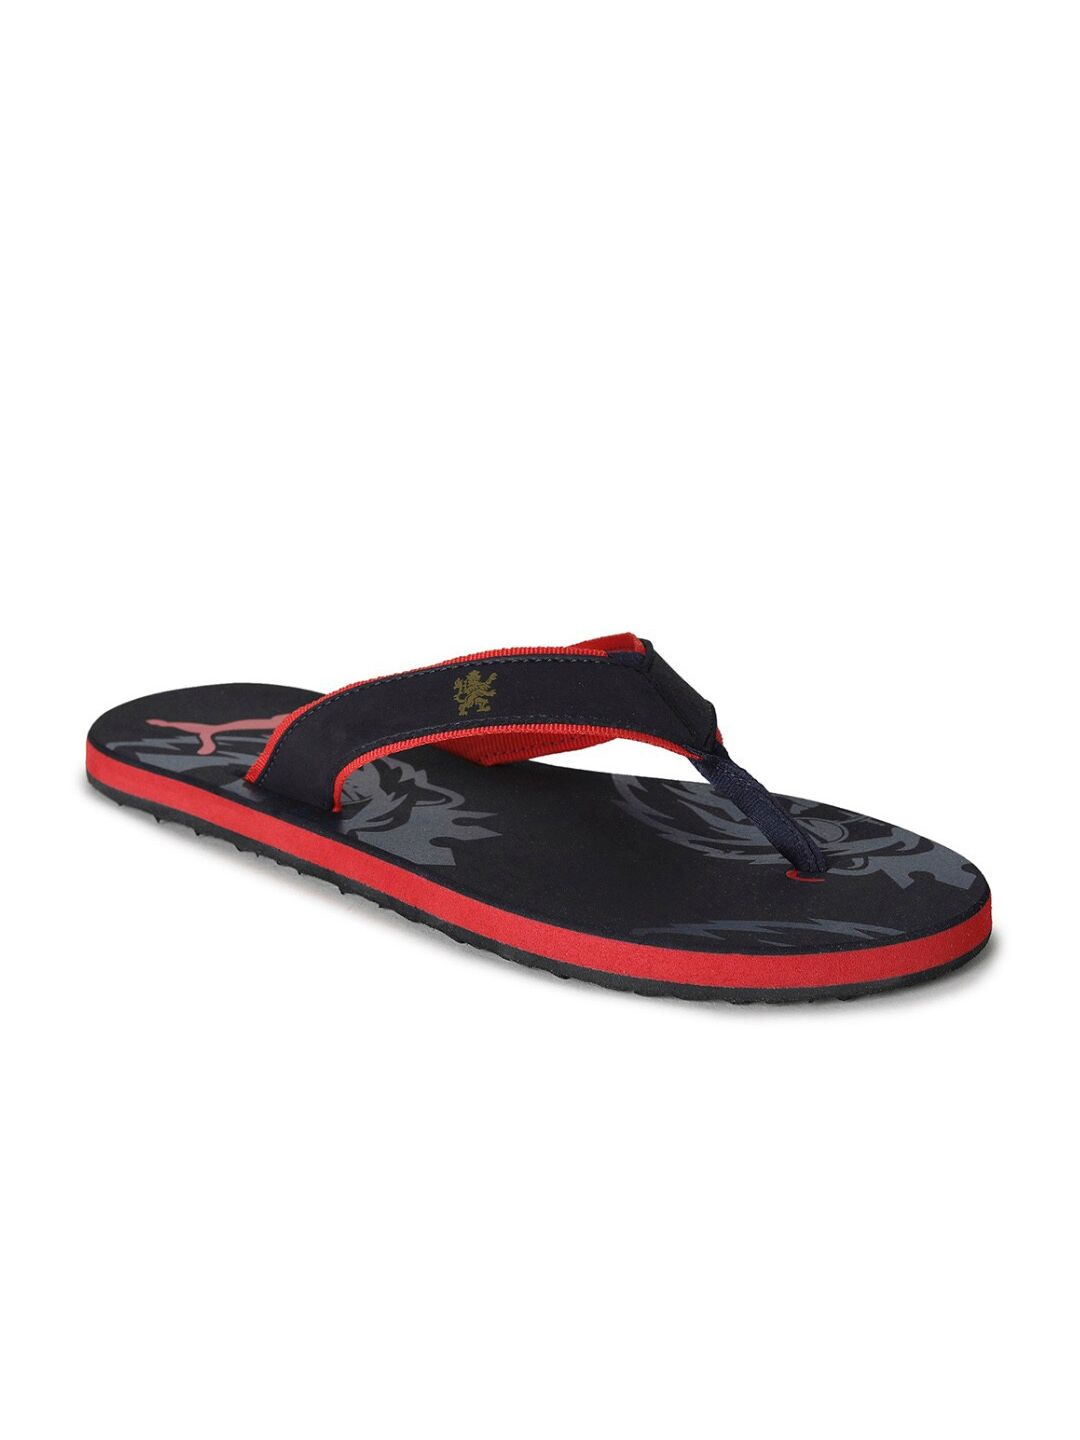 Puma Adult Black & Red Royal Challengers Bangalore Fanwear Printed Thong Flip-Flops Price in India